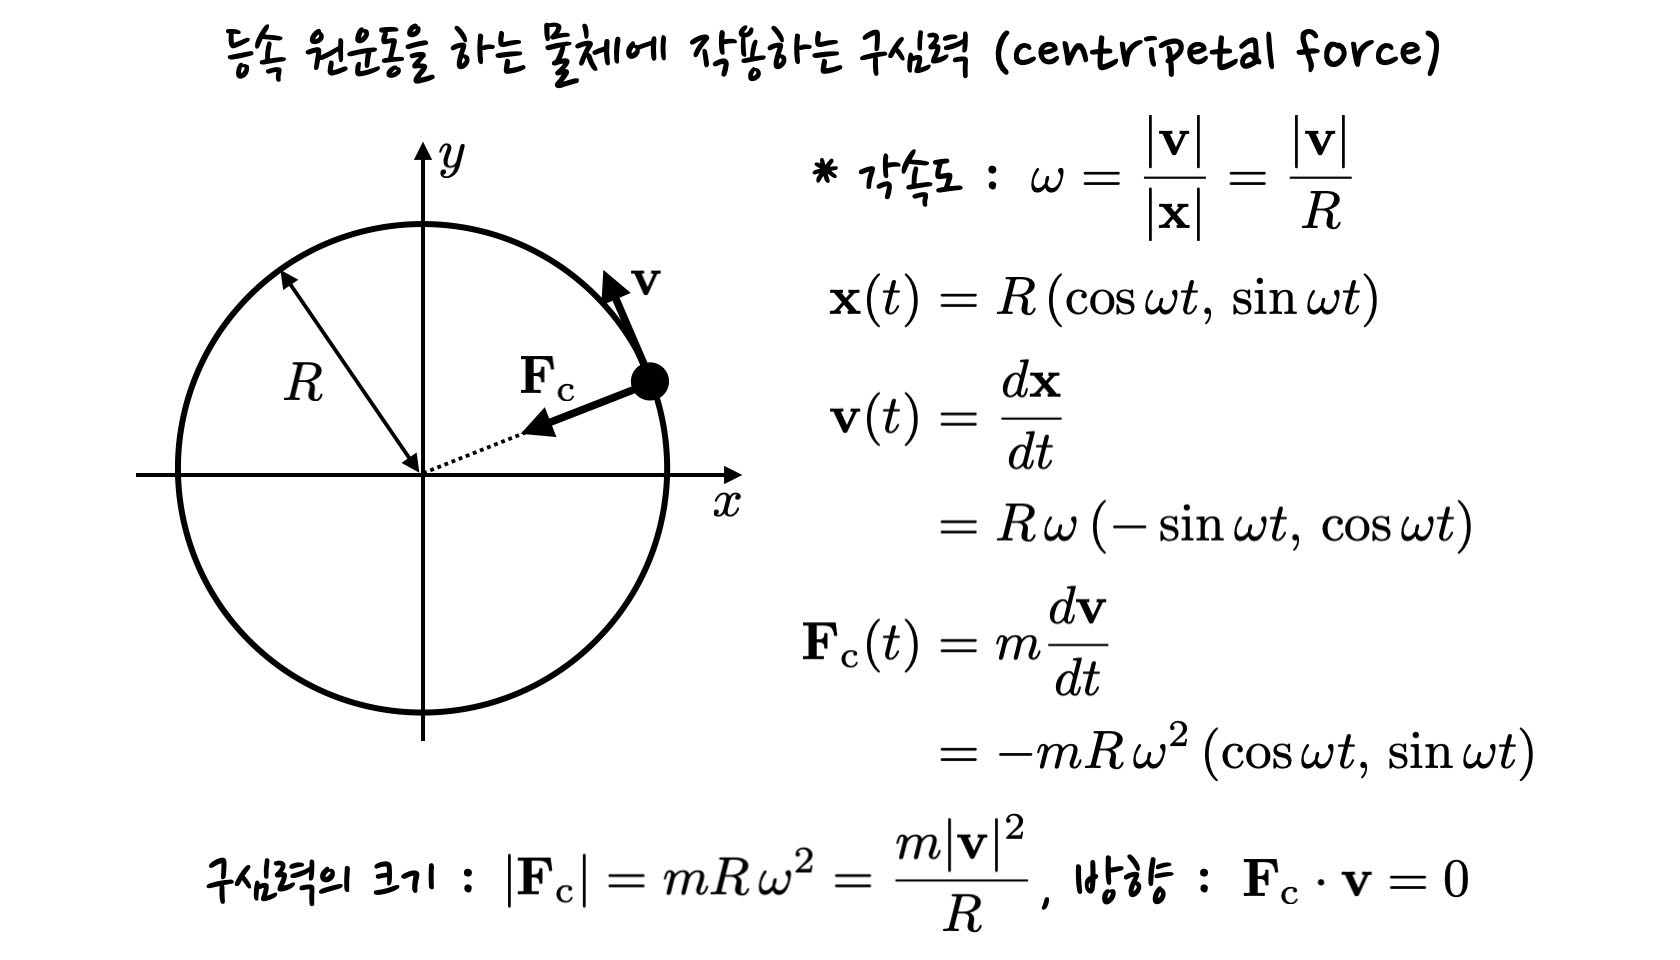 schematics of centripetal force on an object moving with constant speed on a circular orbit. It is demonstrated that the centripetal force is normal to the velocity vector.